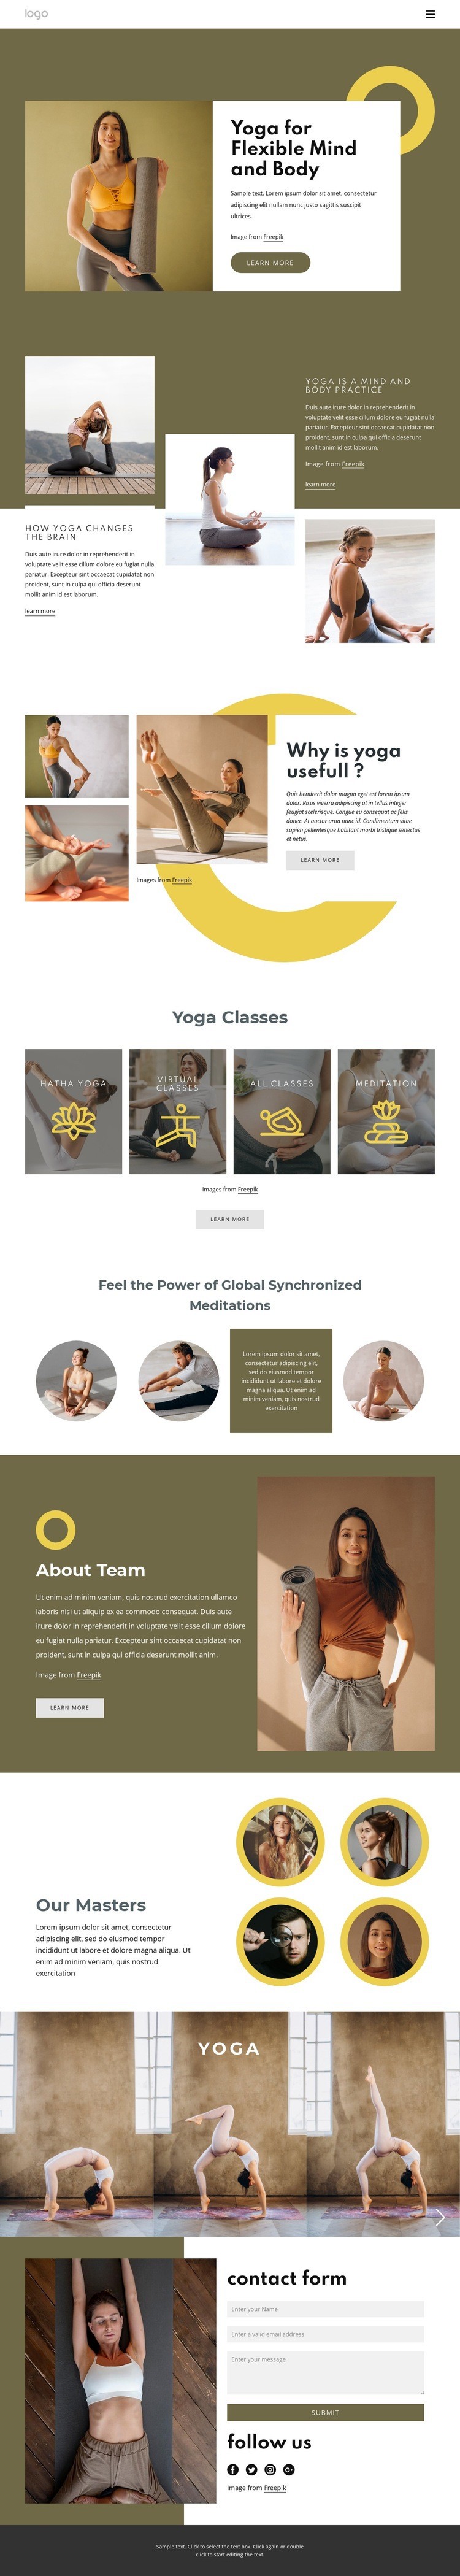 Traditional style yoga Web Page Design